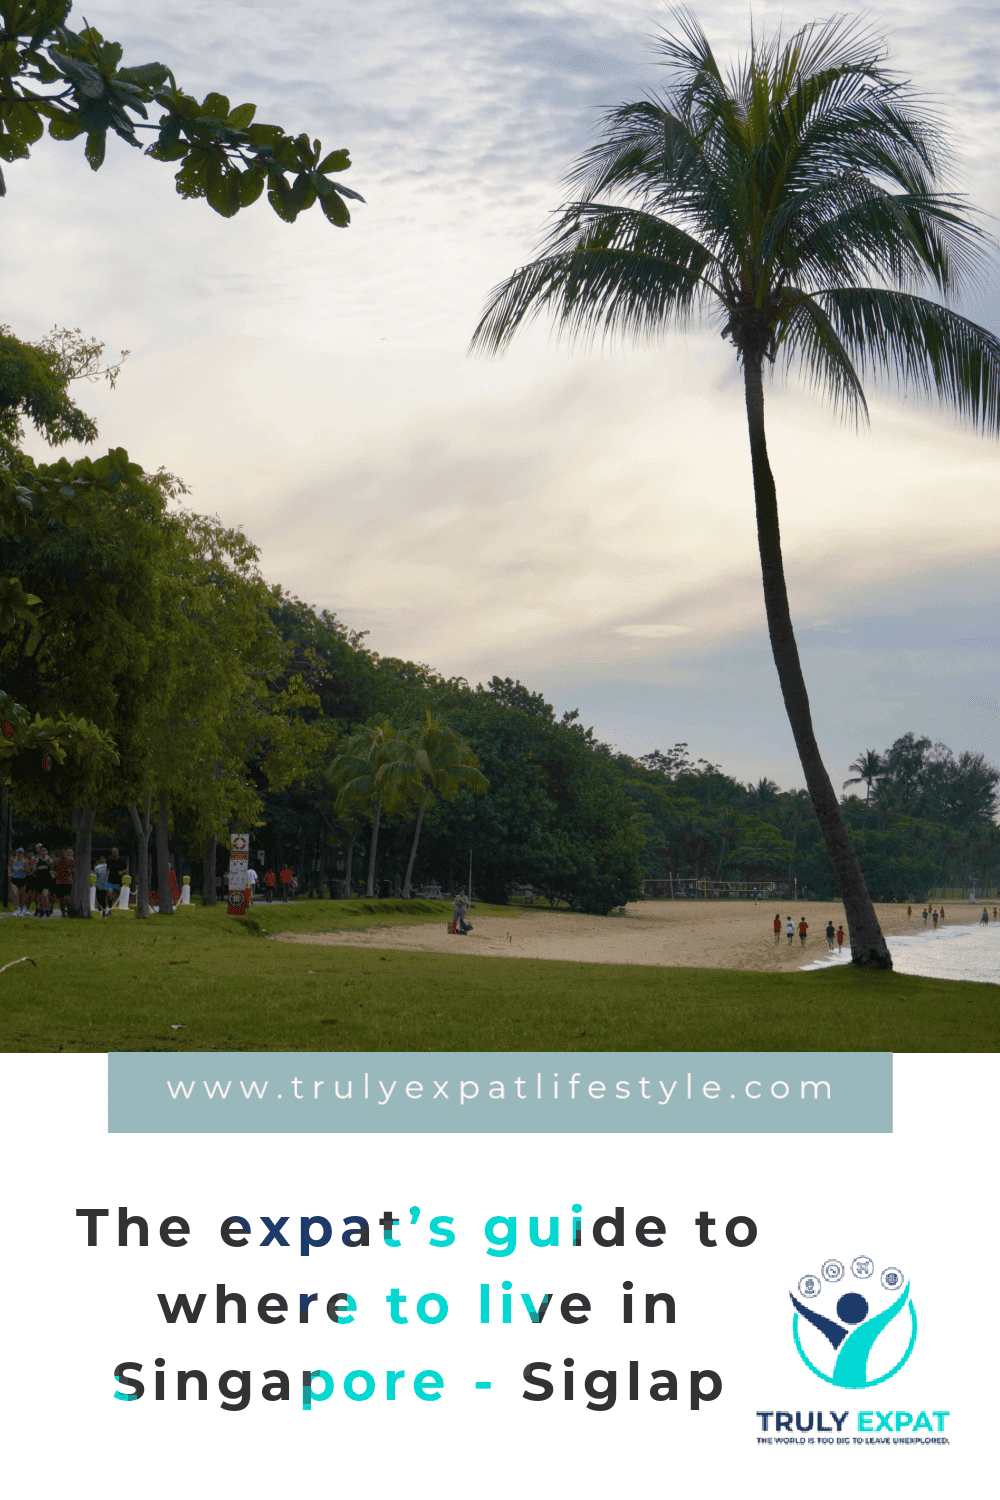 The expat’s guide to where to live in Singapore - Siglap